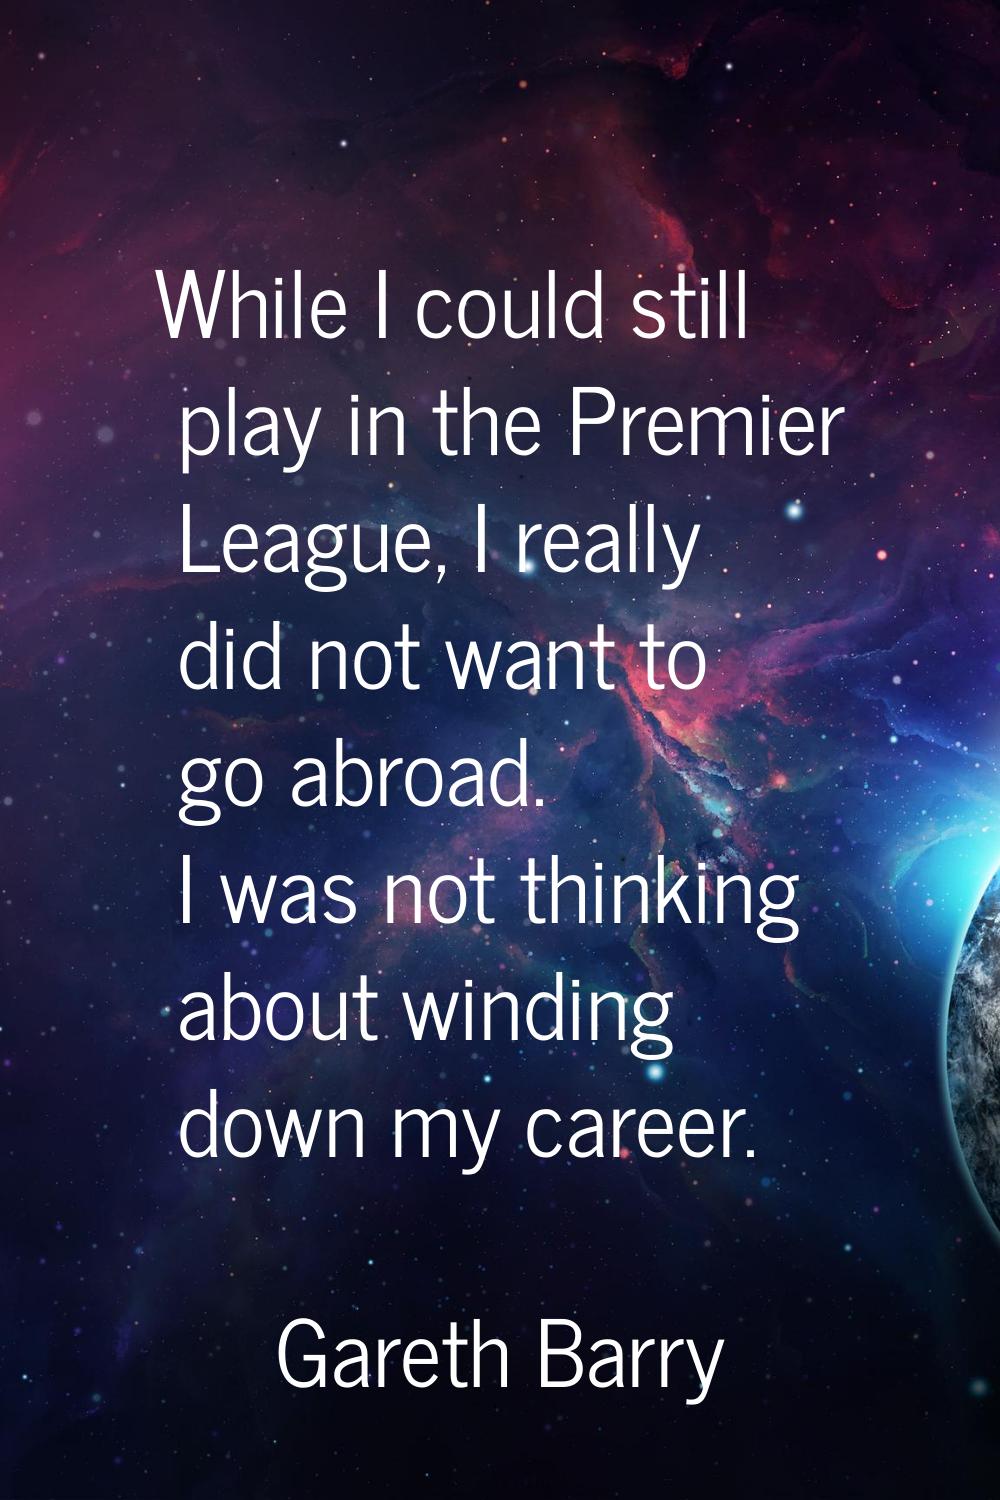 While I could still play in the Premier League, I really did not want to go abroad. I was not think